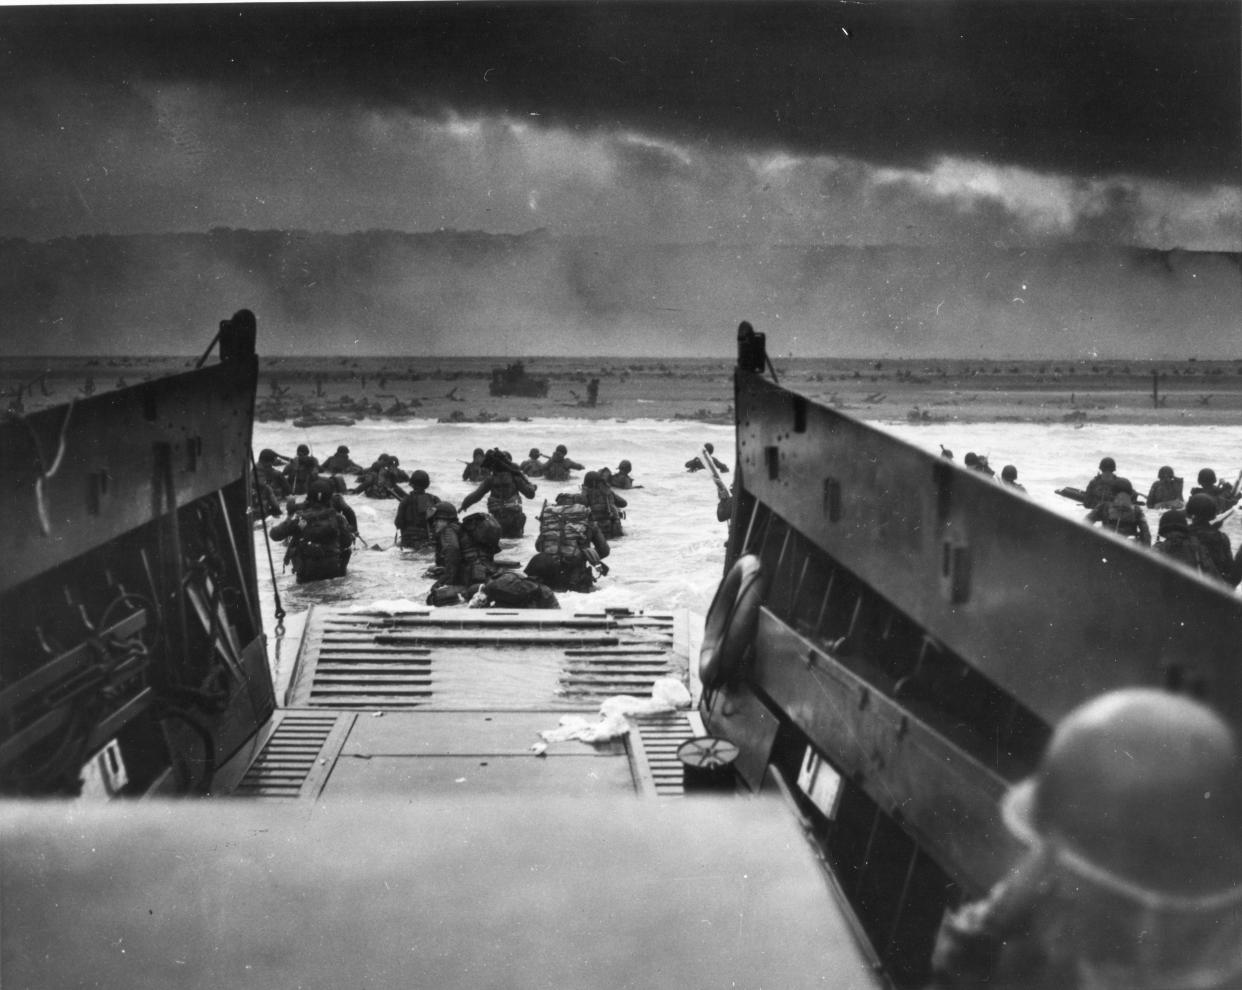 Army troops wade ashore on Omaha Beach during the D-Day landings on June 6, 1944. They were brought to the beach by a Coast Guard manned LCVP.